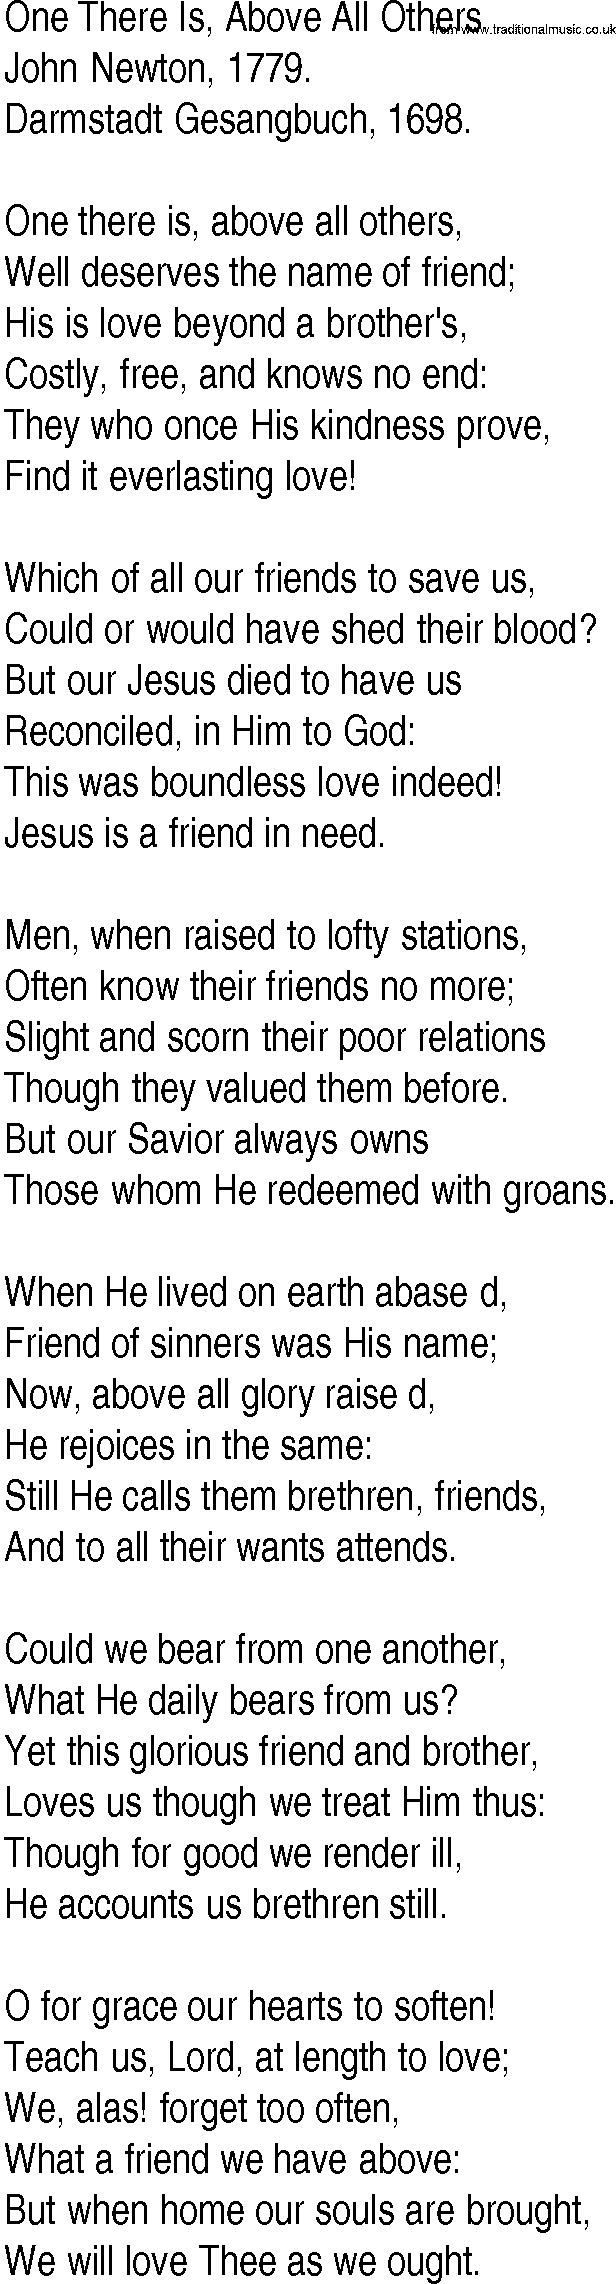 Hymn and Gospel Song: One There Is, Above All Others by John Newton lyrics